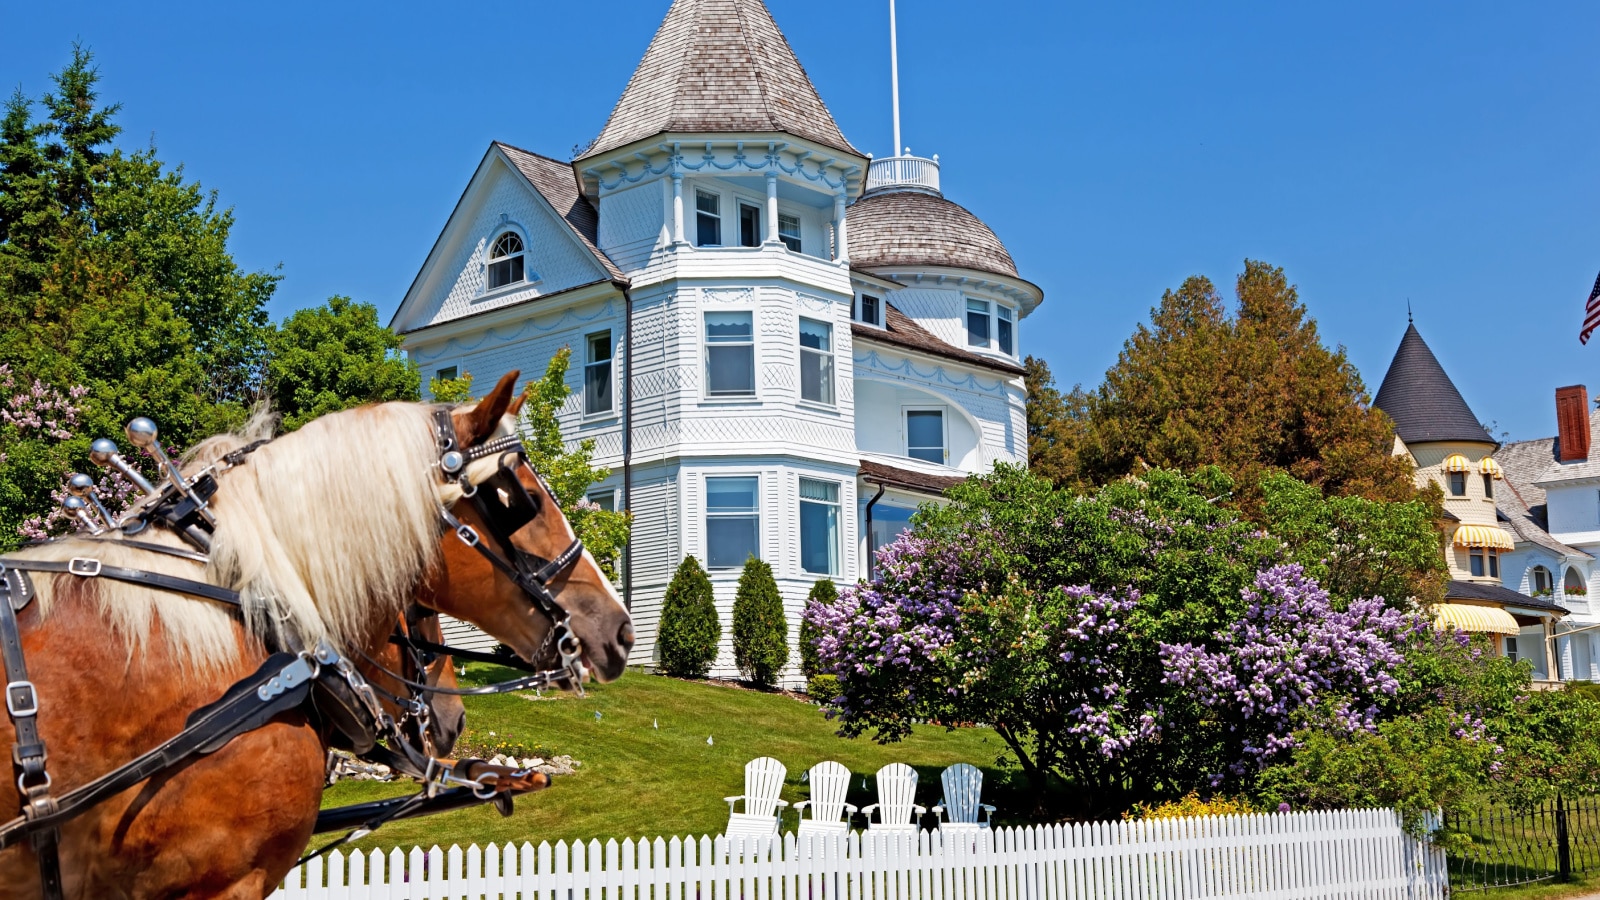 The Wedding Cake Cottage is shown on the West Bluff on Michigan's Mackinac Island. A horse stands in front and the lilacs out front are in full bloom